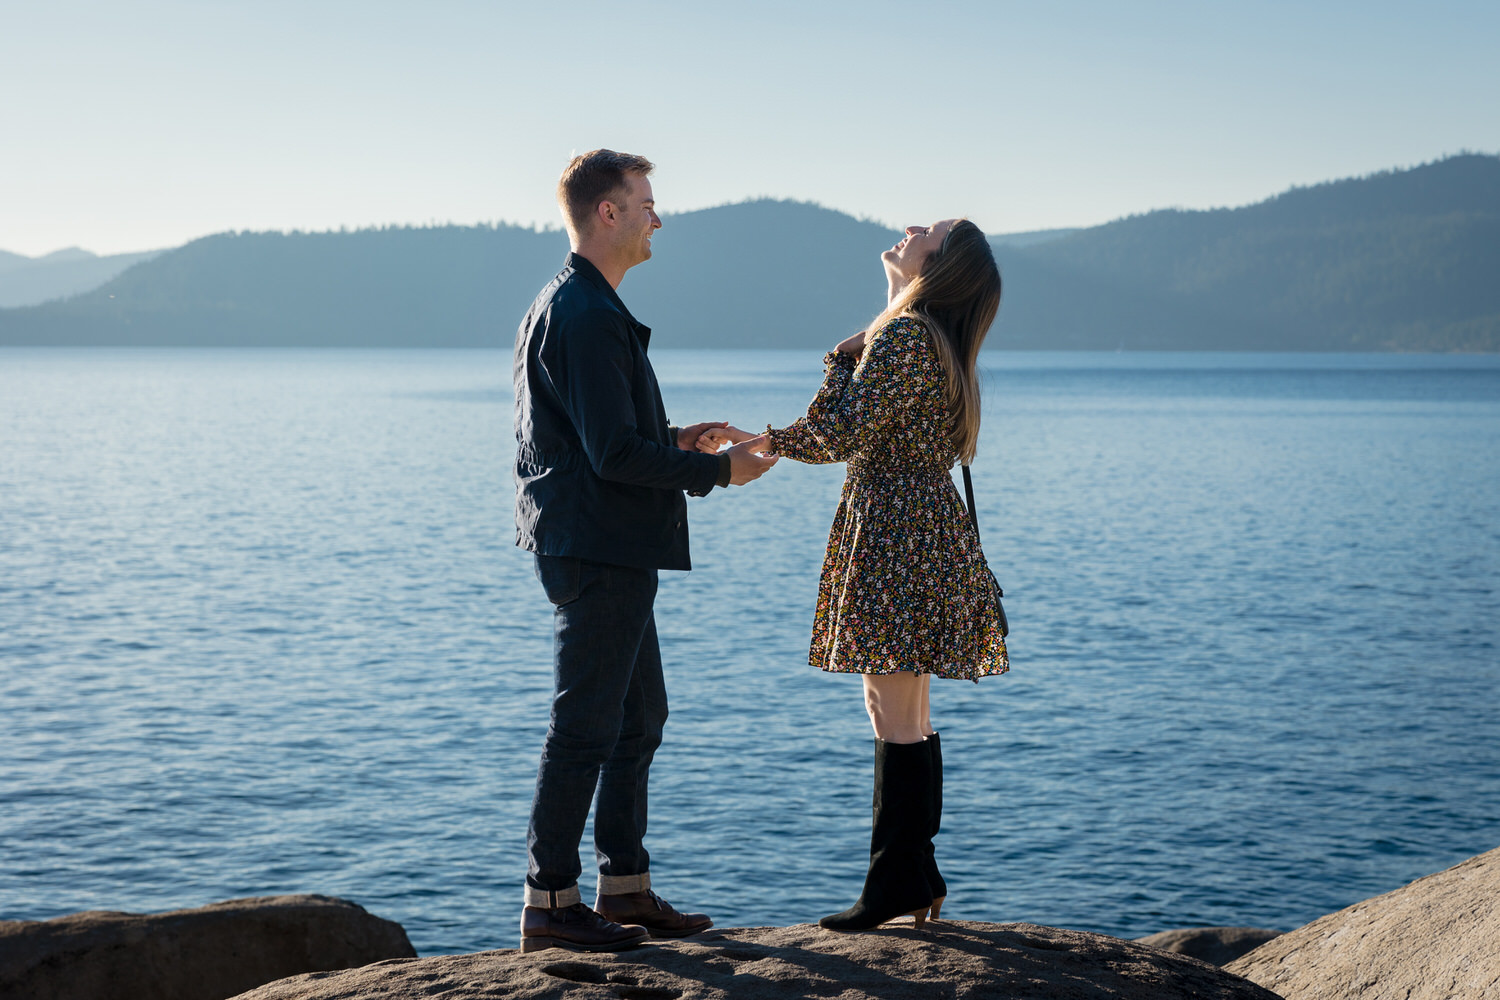 A man surprises his girlfriend at their private wedding proposal at a beautiful lakeside location near Lake Tahoe.